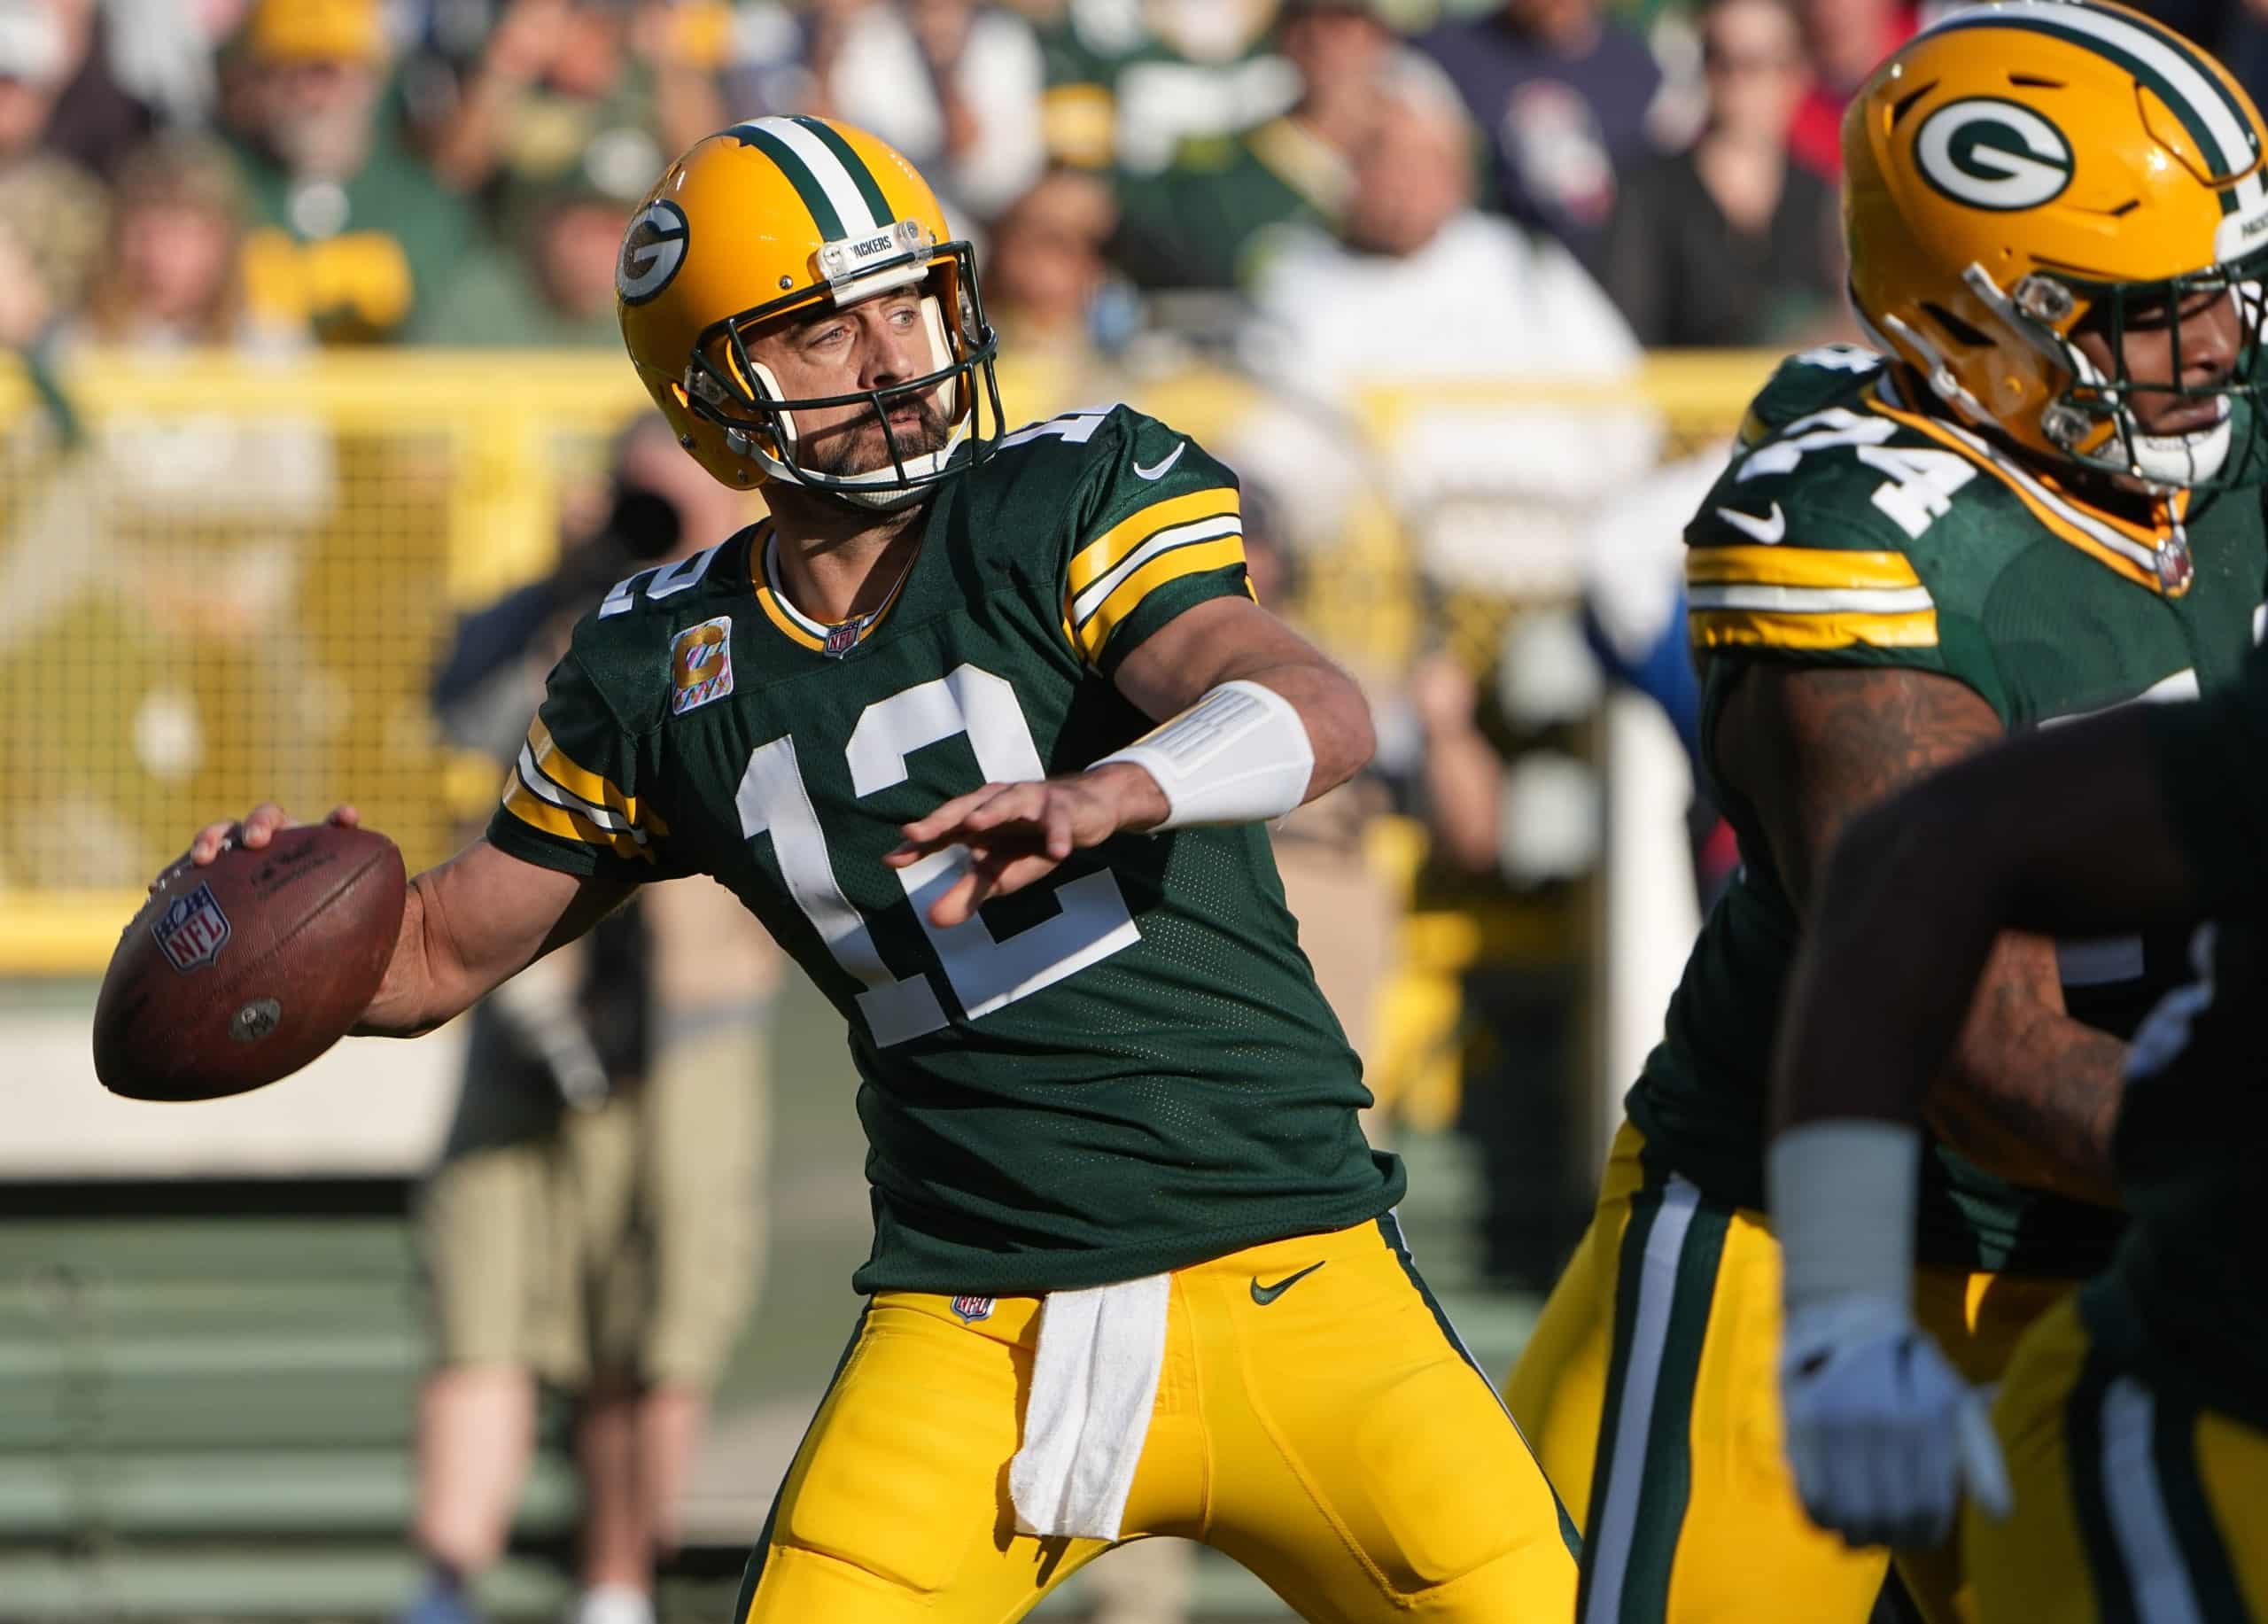 Green Bay Packers quarterback Aaron Rodgers (12) throws an incomplete pass during the second quarter of their game Sunday, October 2, 2022 at Lambeau Field in Green Bay, Wis. The Green Bay Packers beat the New England Patriots 27-24 in overtime.